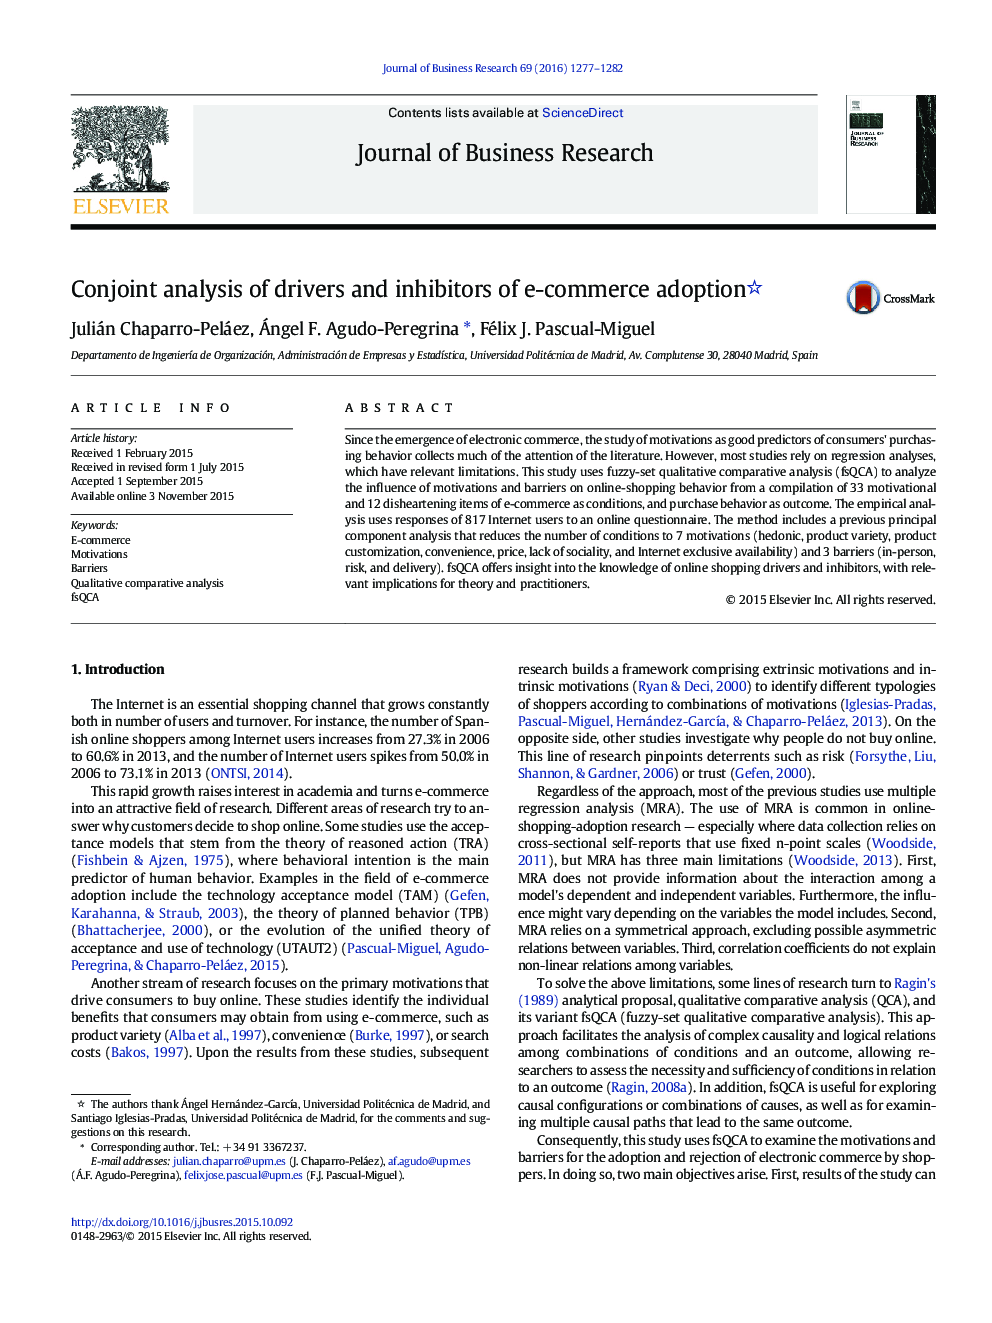 Conjoint analysis of drivers and inhibitors of e-commerce adoption 